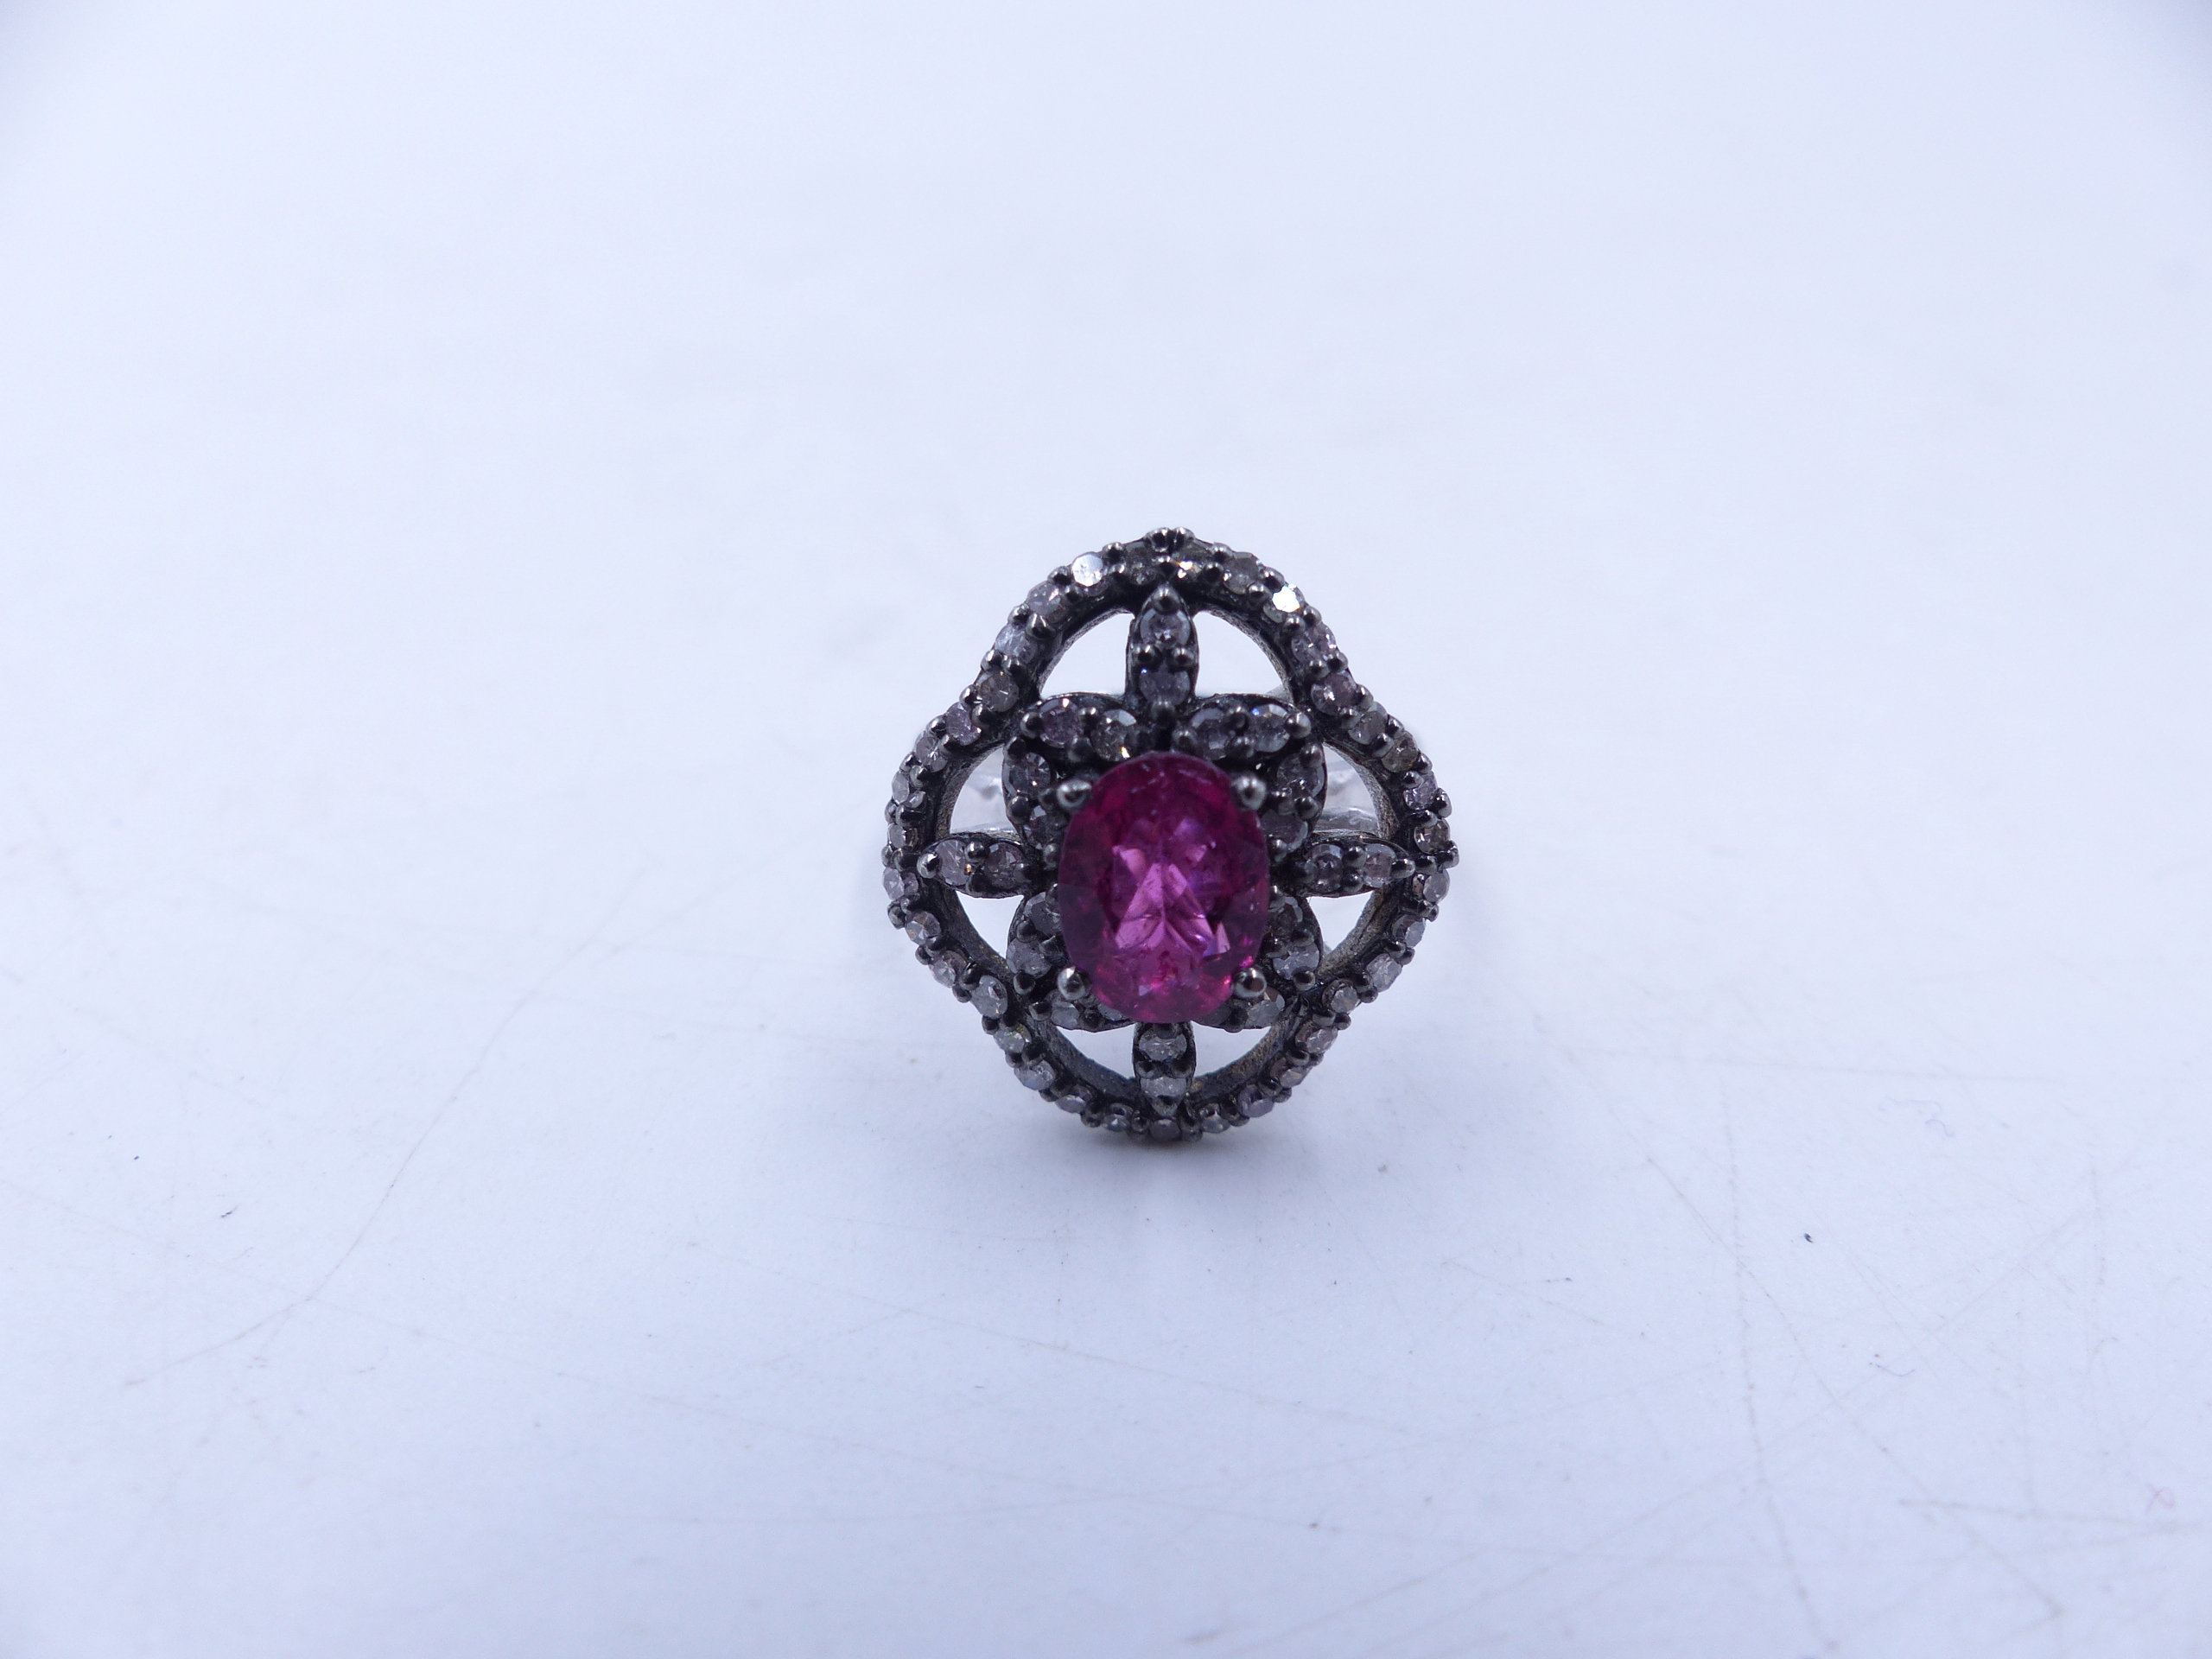 A PINK TOURMALINE AND DIAMOND OPEN WORK FILIGREE RING SET IN A WHITE METAL MOUNT,THE CENTRAL PINK - Image 11 of 17